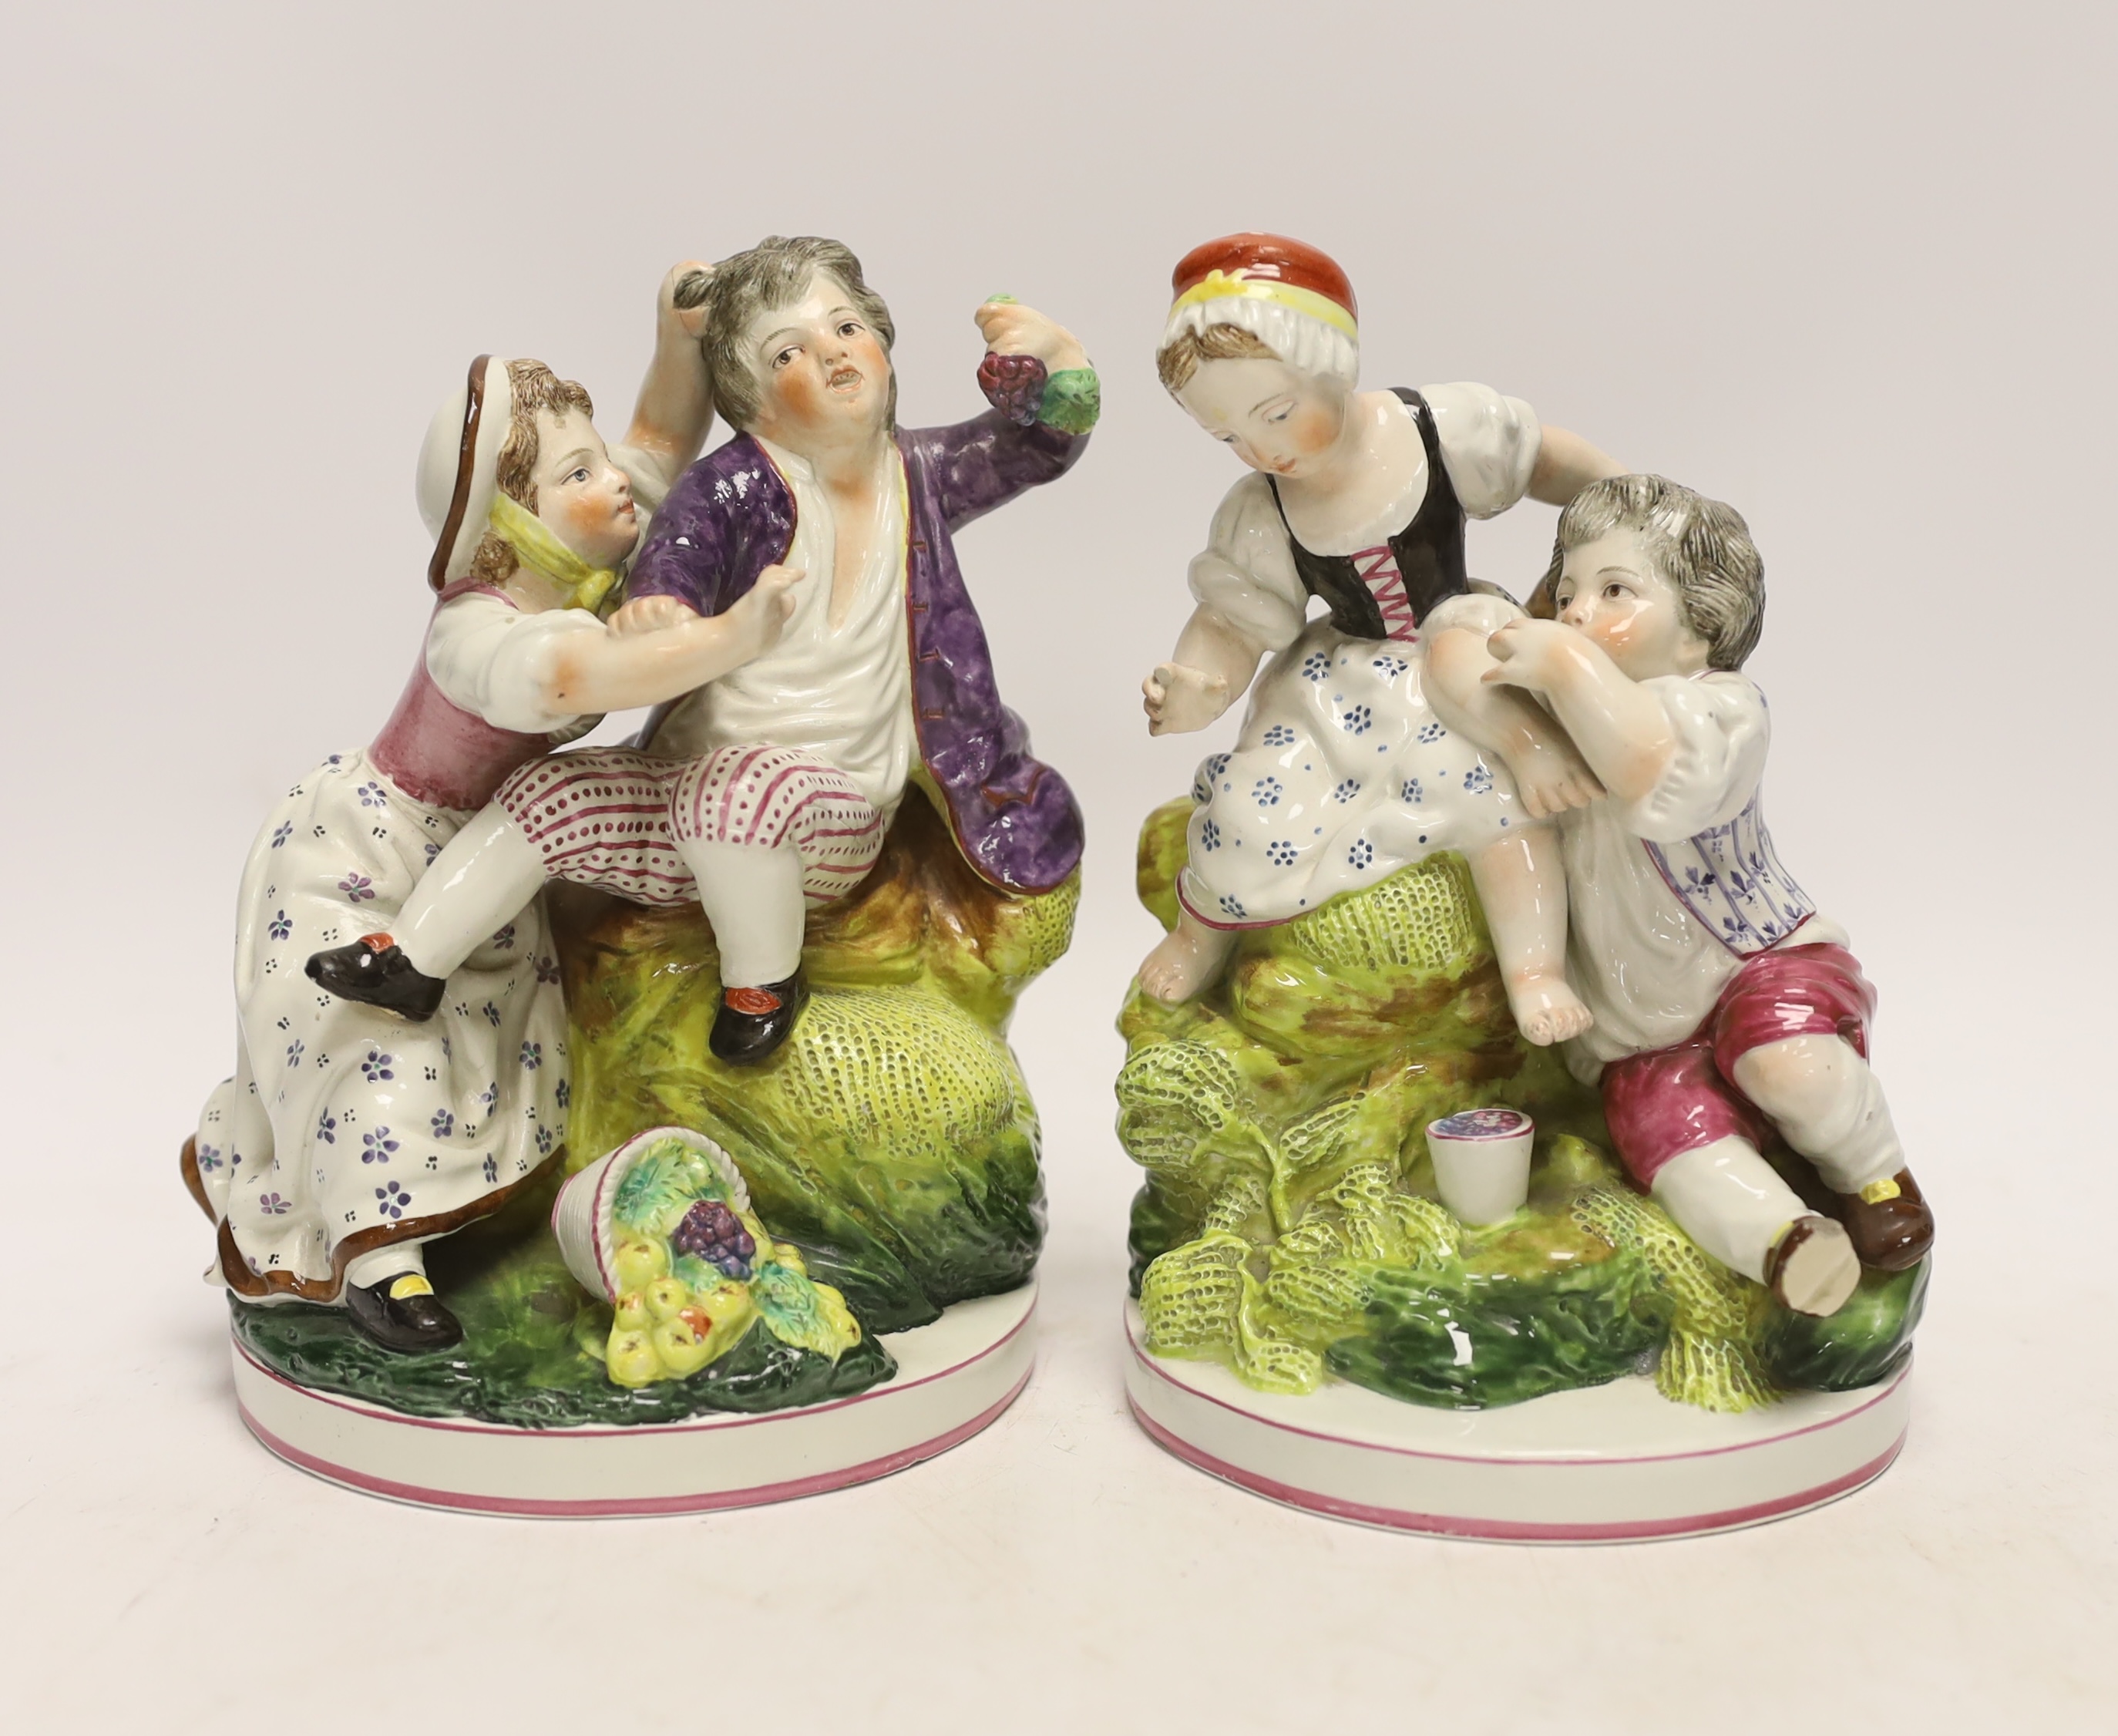 A pair of Niderviller faience figure groups, late 18th/early 19th century, tallest 17.5cm